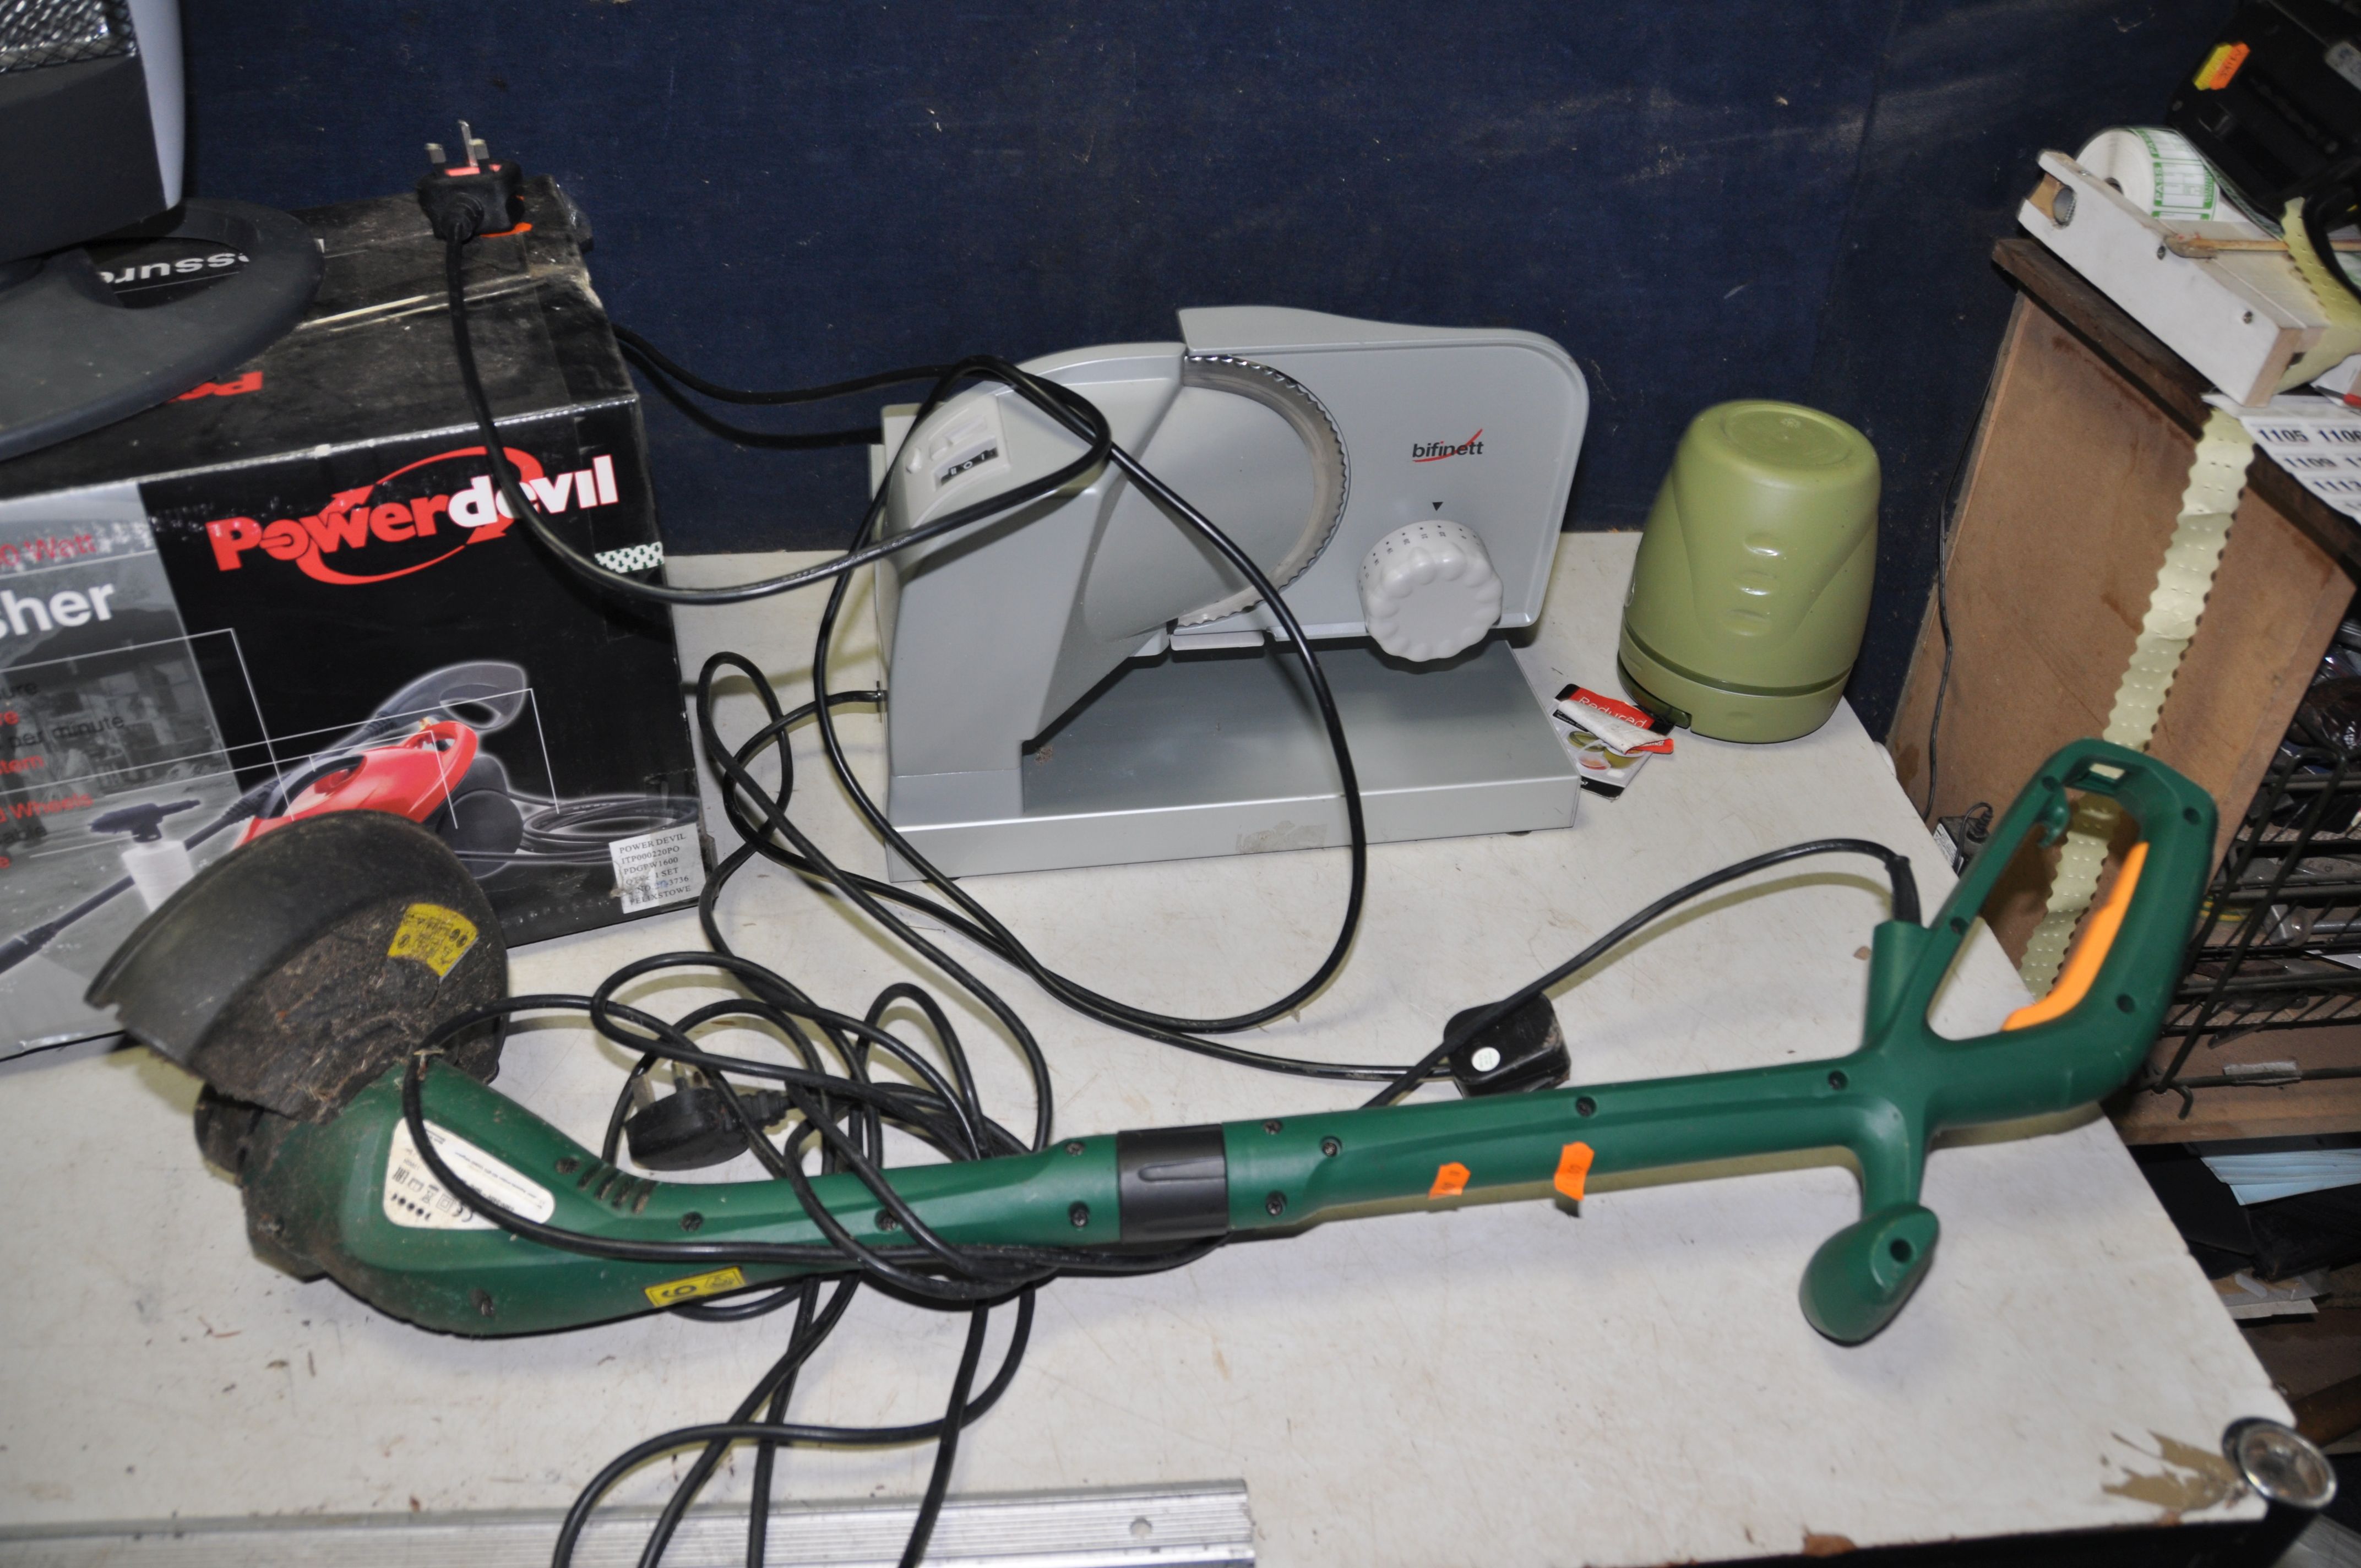 A POWER DEVIL PRESSURE WASHER, sealed in box, a Kingfisher strimmer, a Fine Elements halogen heater, - Image 3 of 3